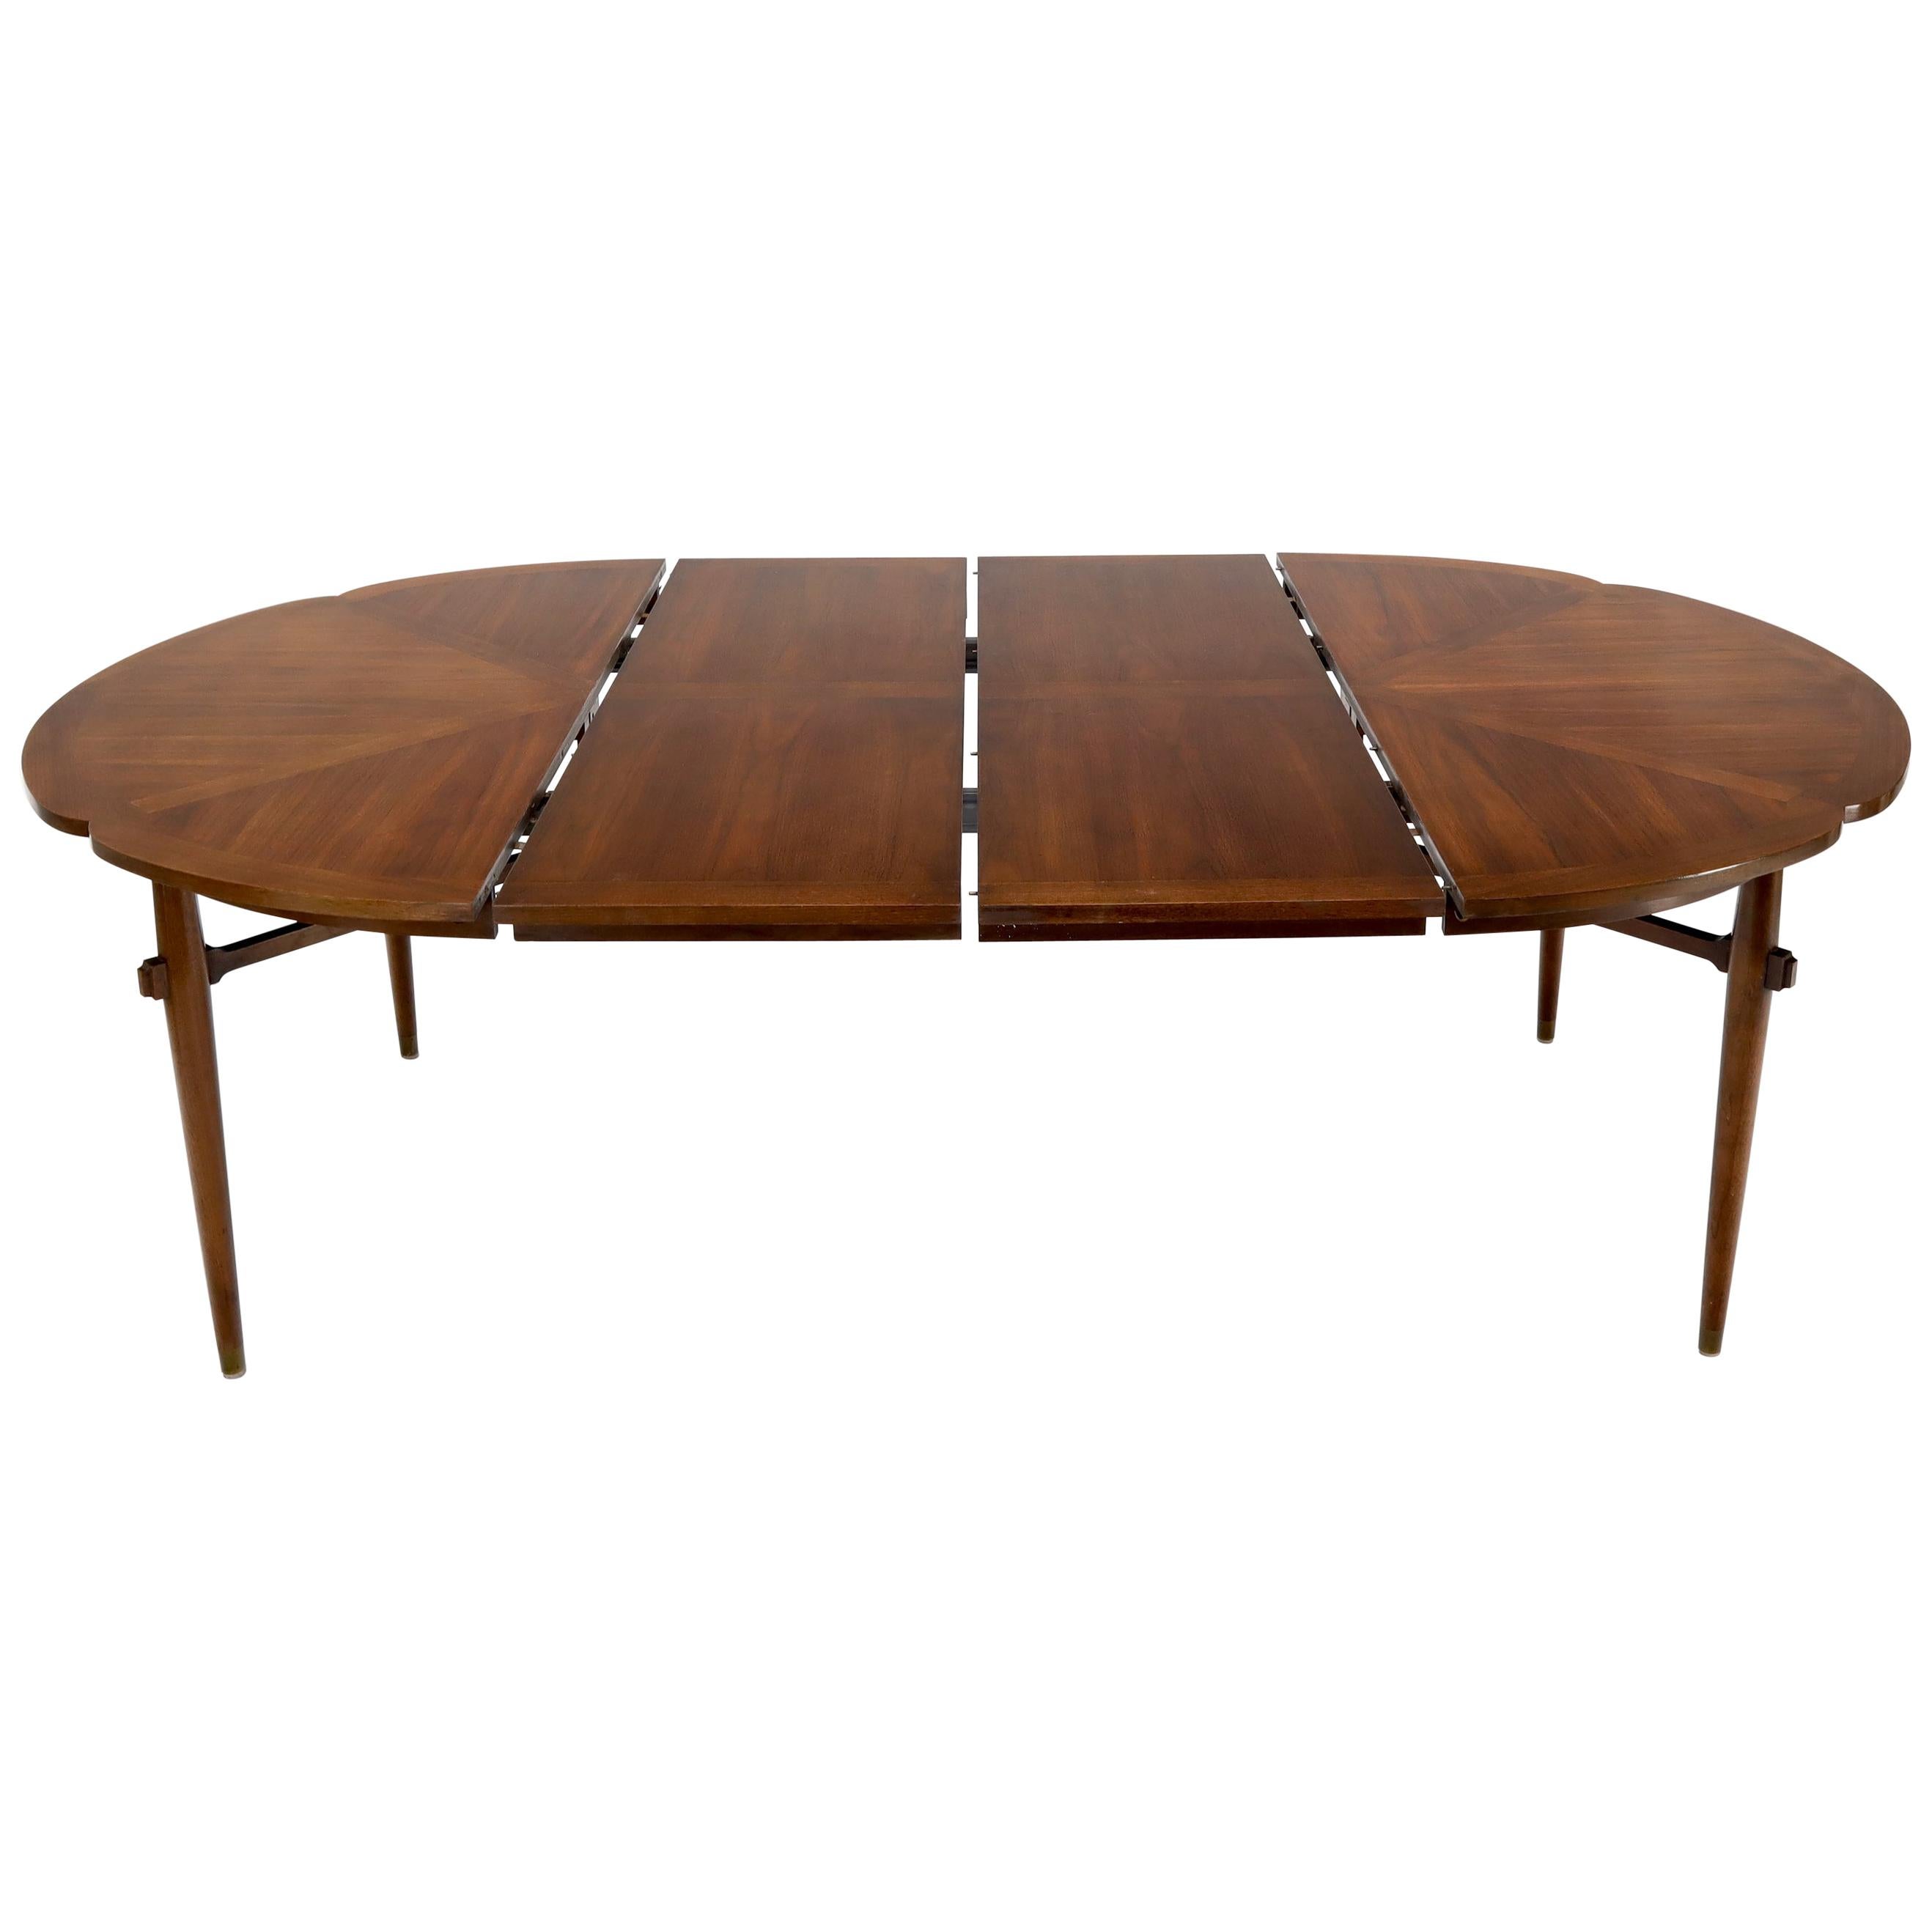 Walnut Daisy Shape Top Dining Table with Two Extension Boards Leaves